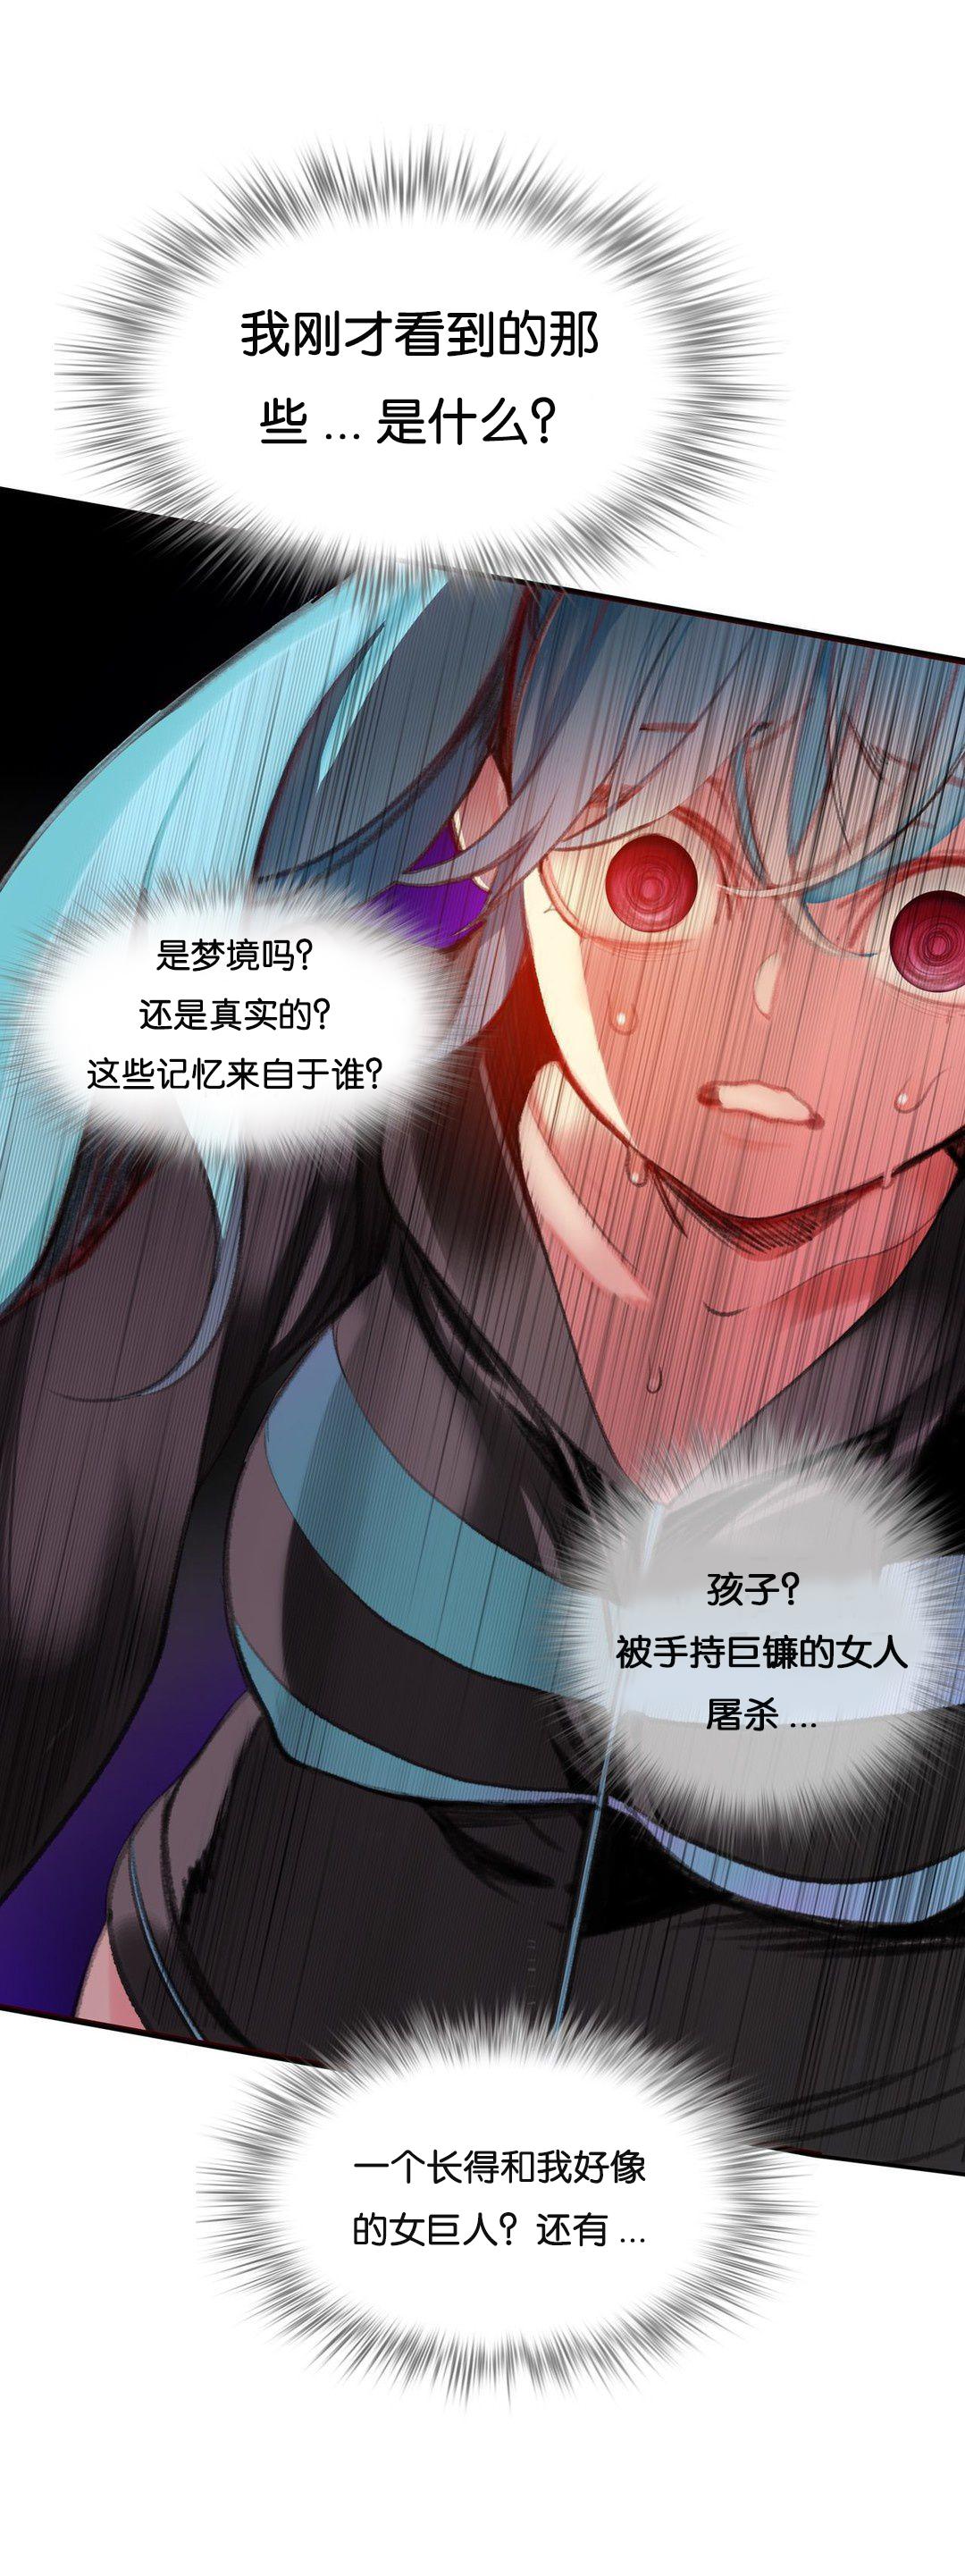 [Juder] Lilith`s Cord (第二季) Ch.61-65 [Chinese] [aaatwist个人汉化] [Ongoing] 74